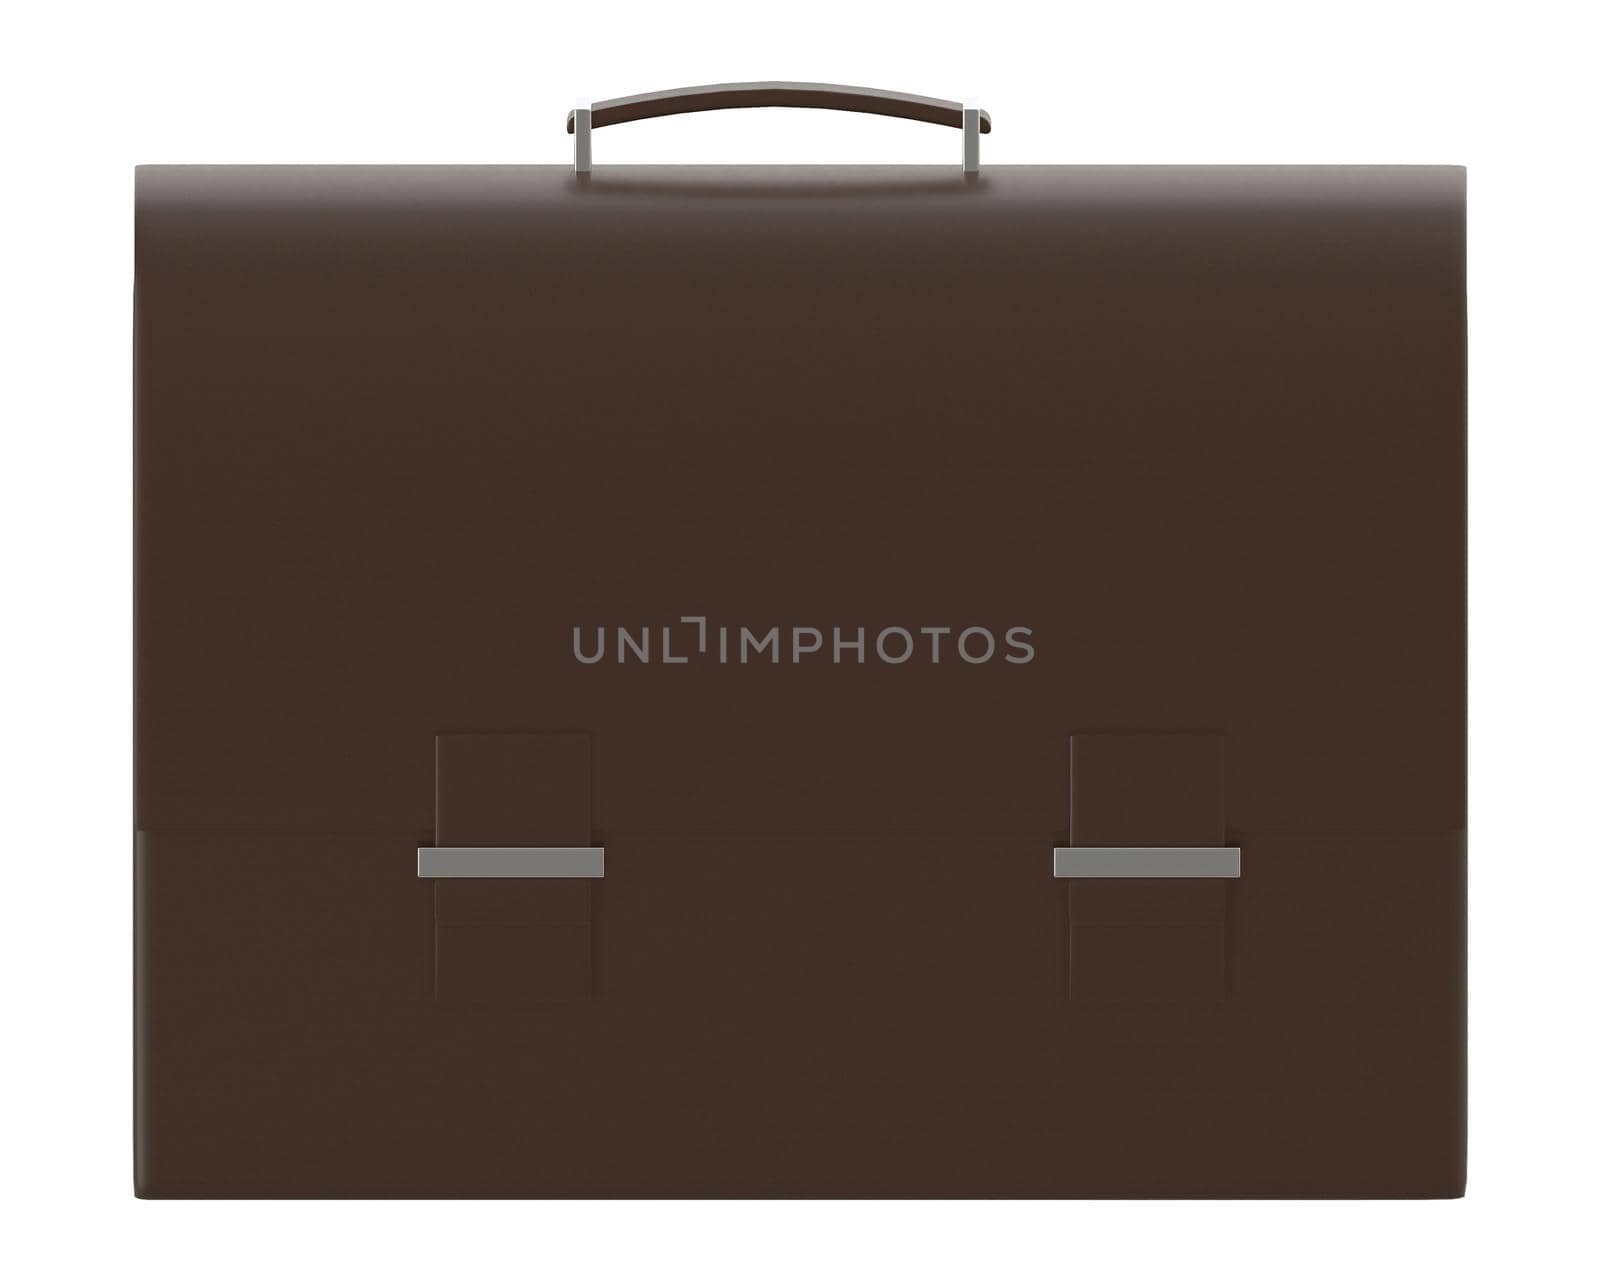 briefcase in white isolated background - 3d rendering